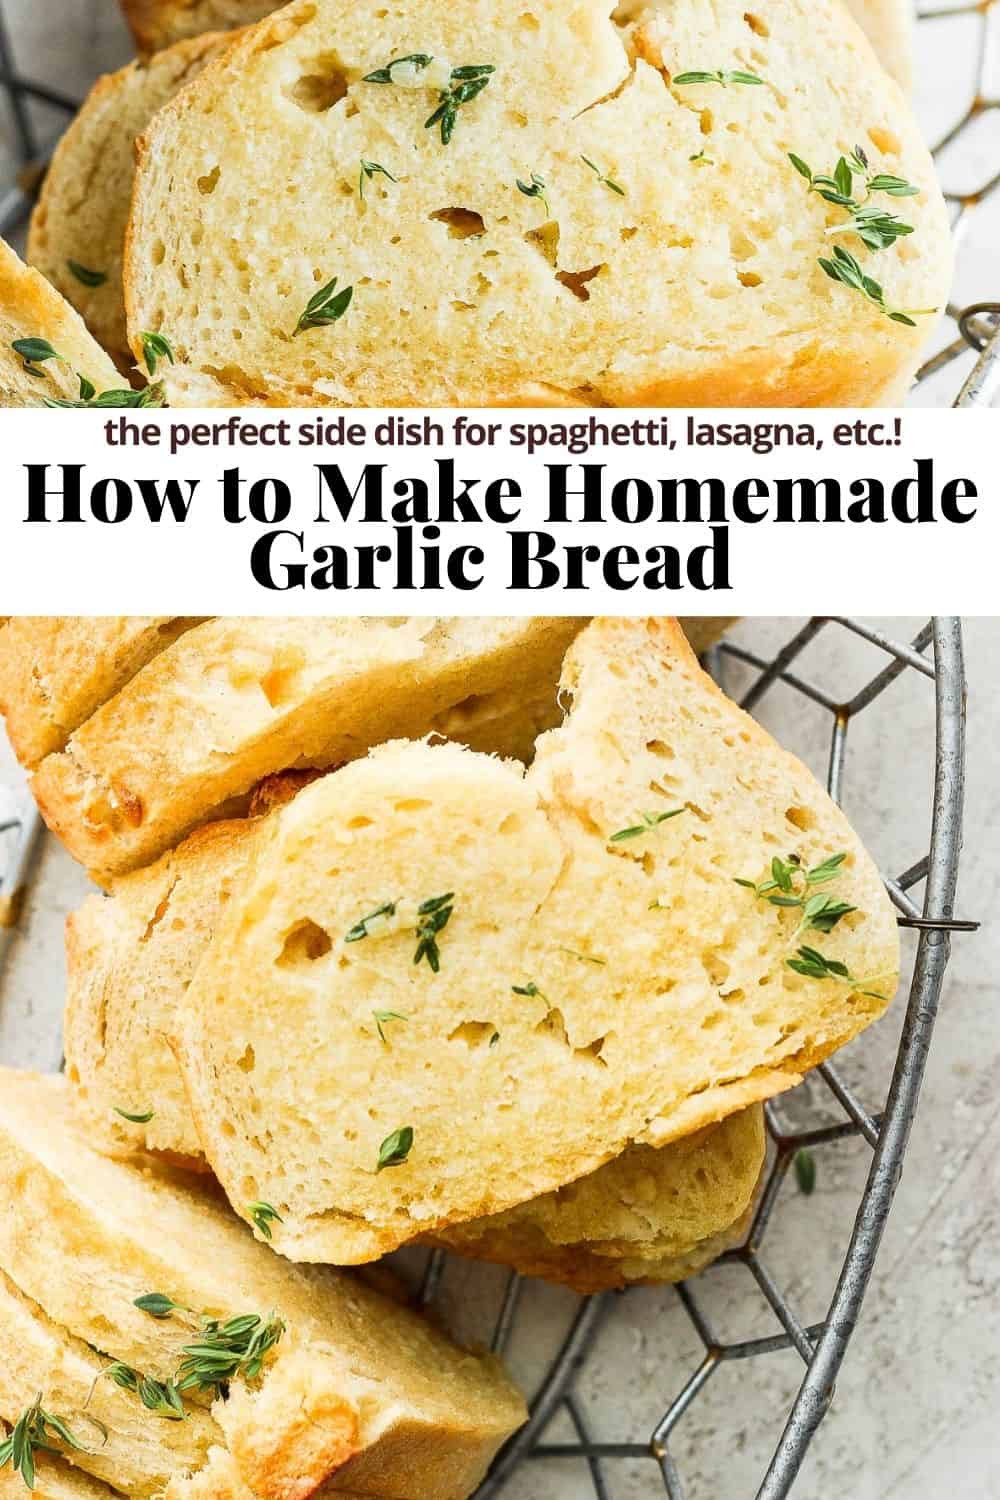 Pinterest image for how to make garlic bread.